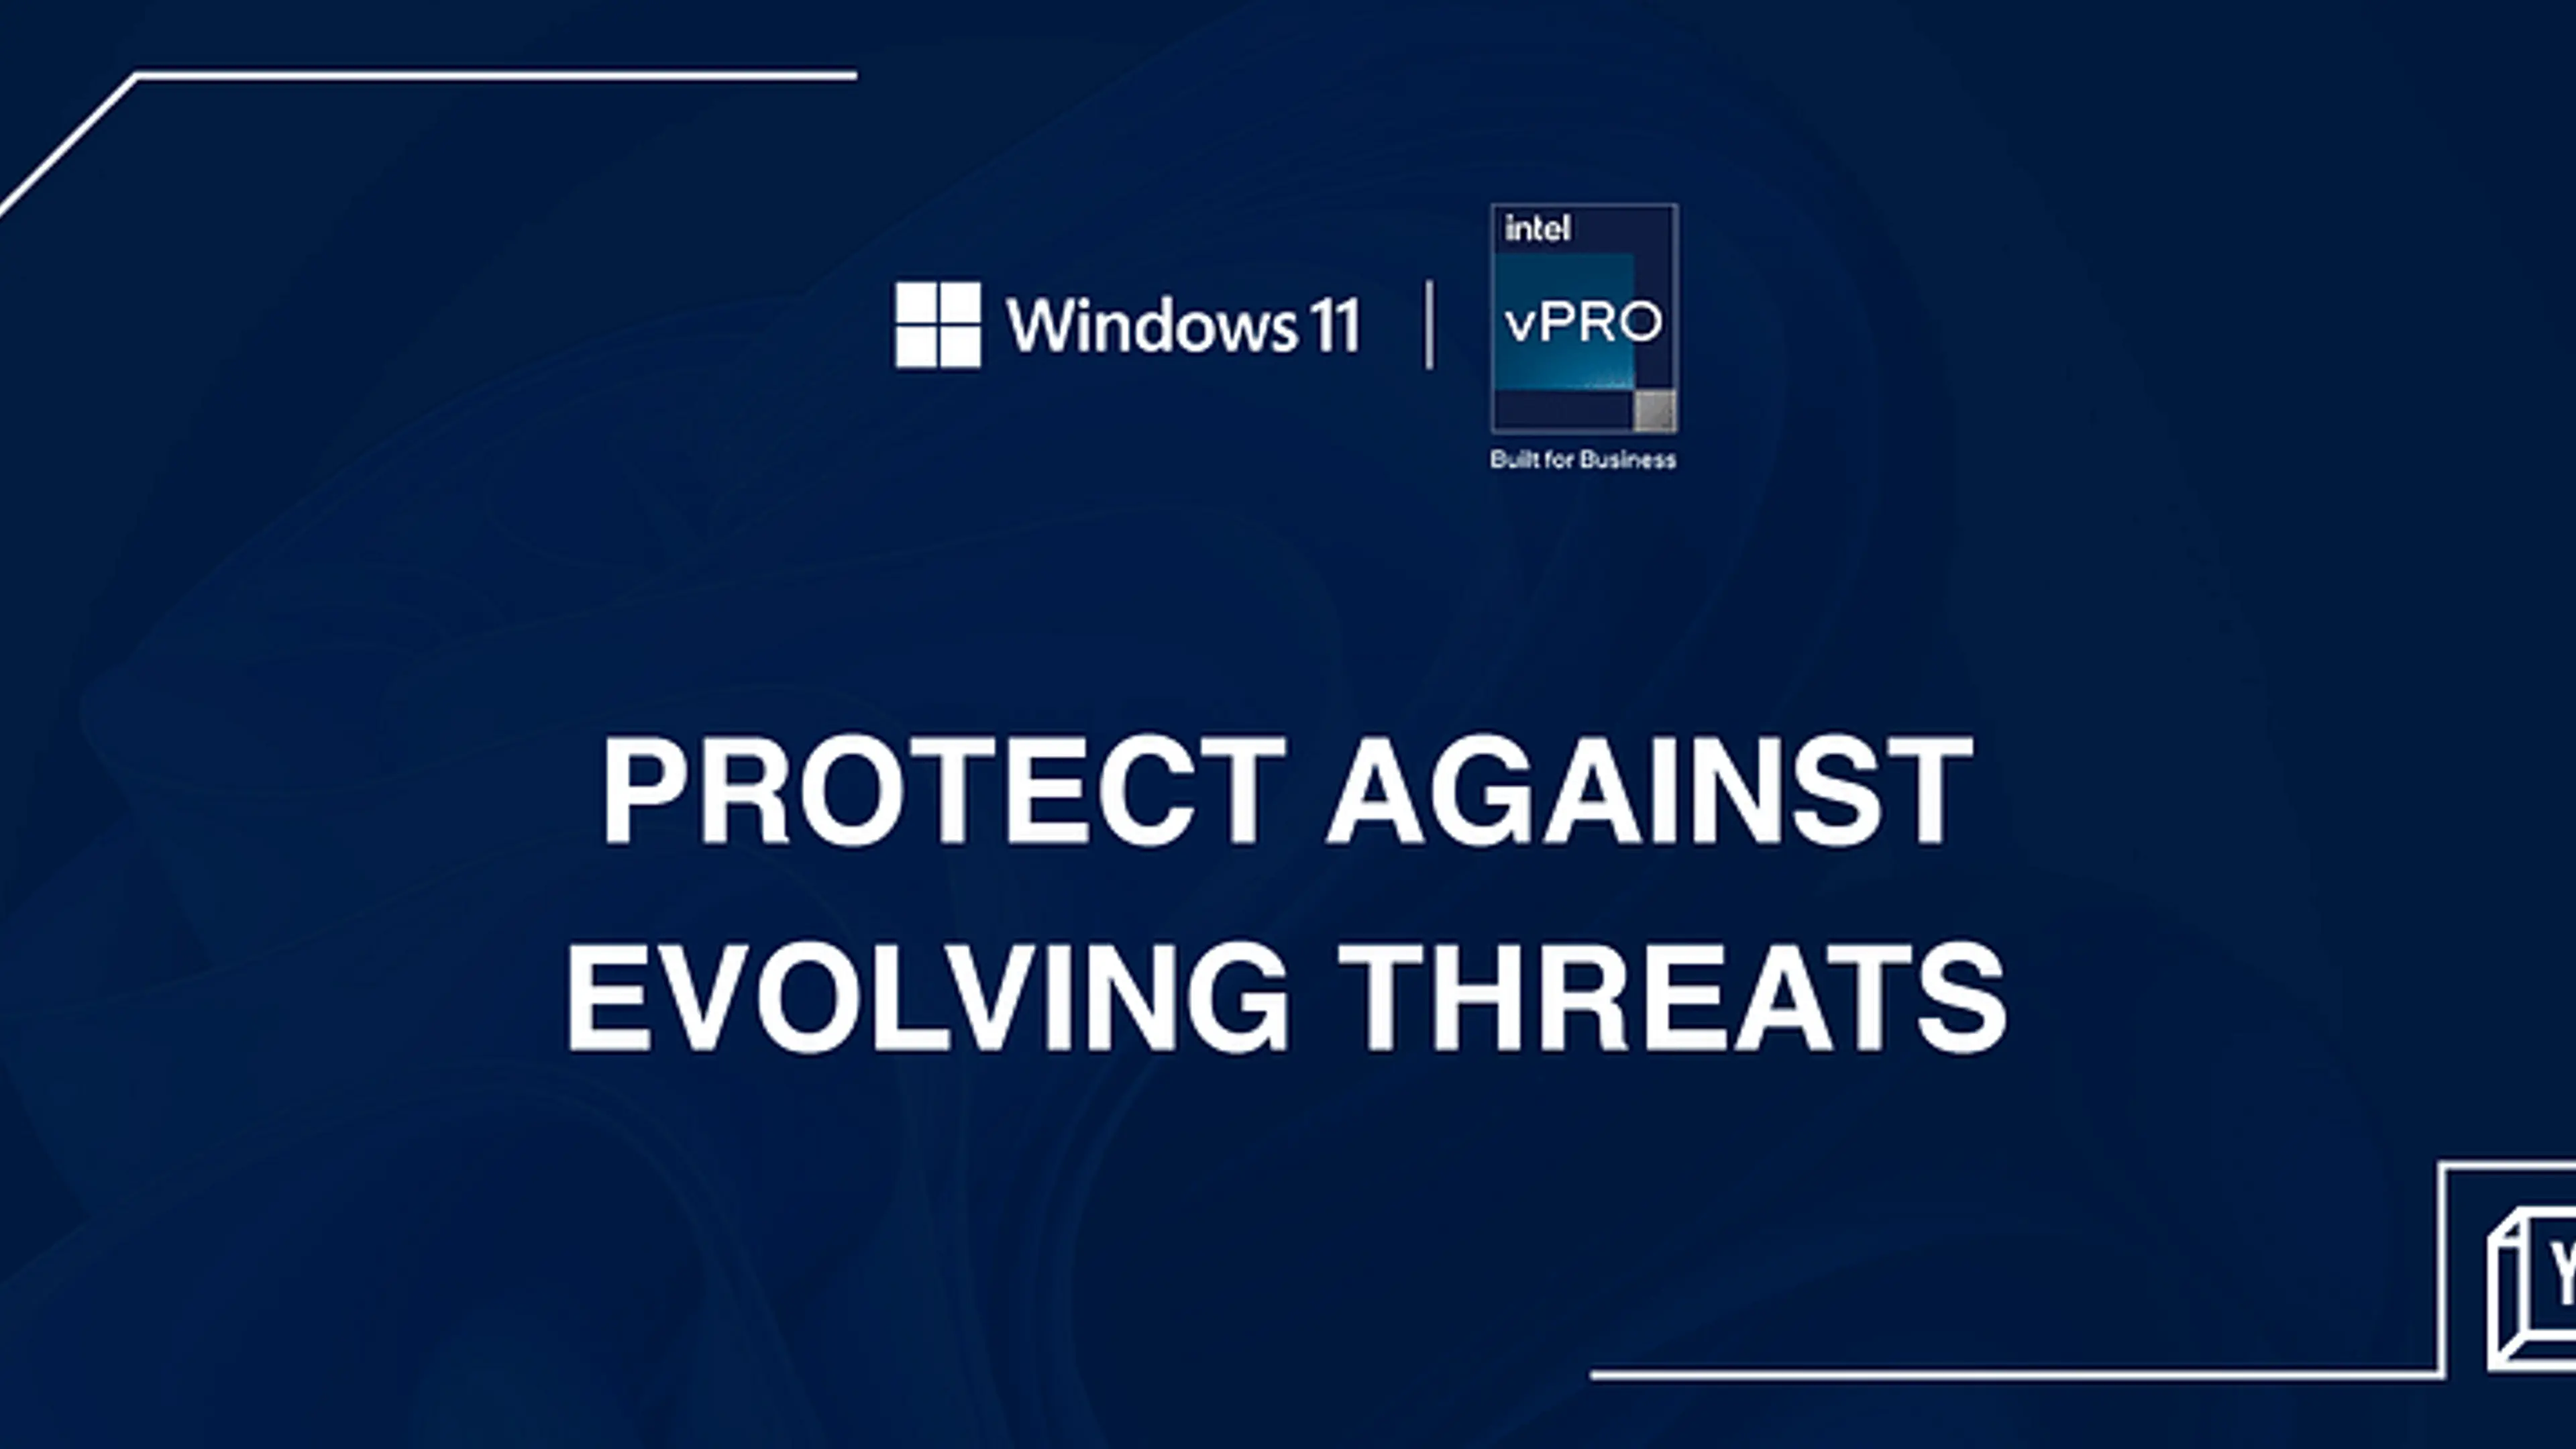 How Windows 11 Pro enables secure hybrid work with business ready devices that are powerful for employees and consistent for IT.